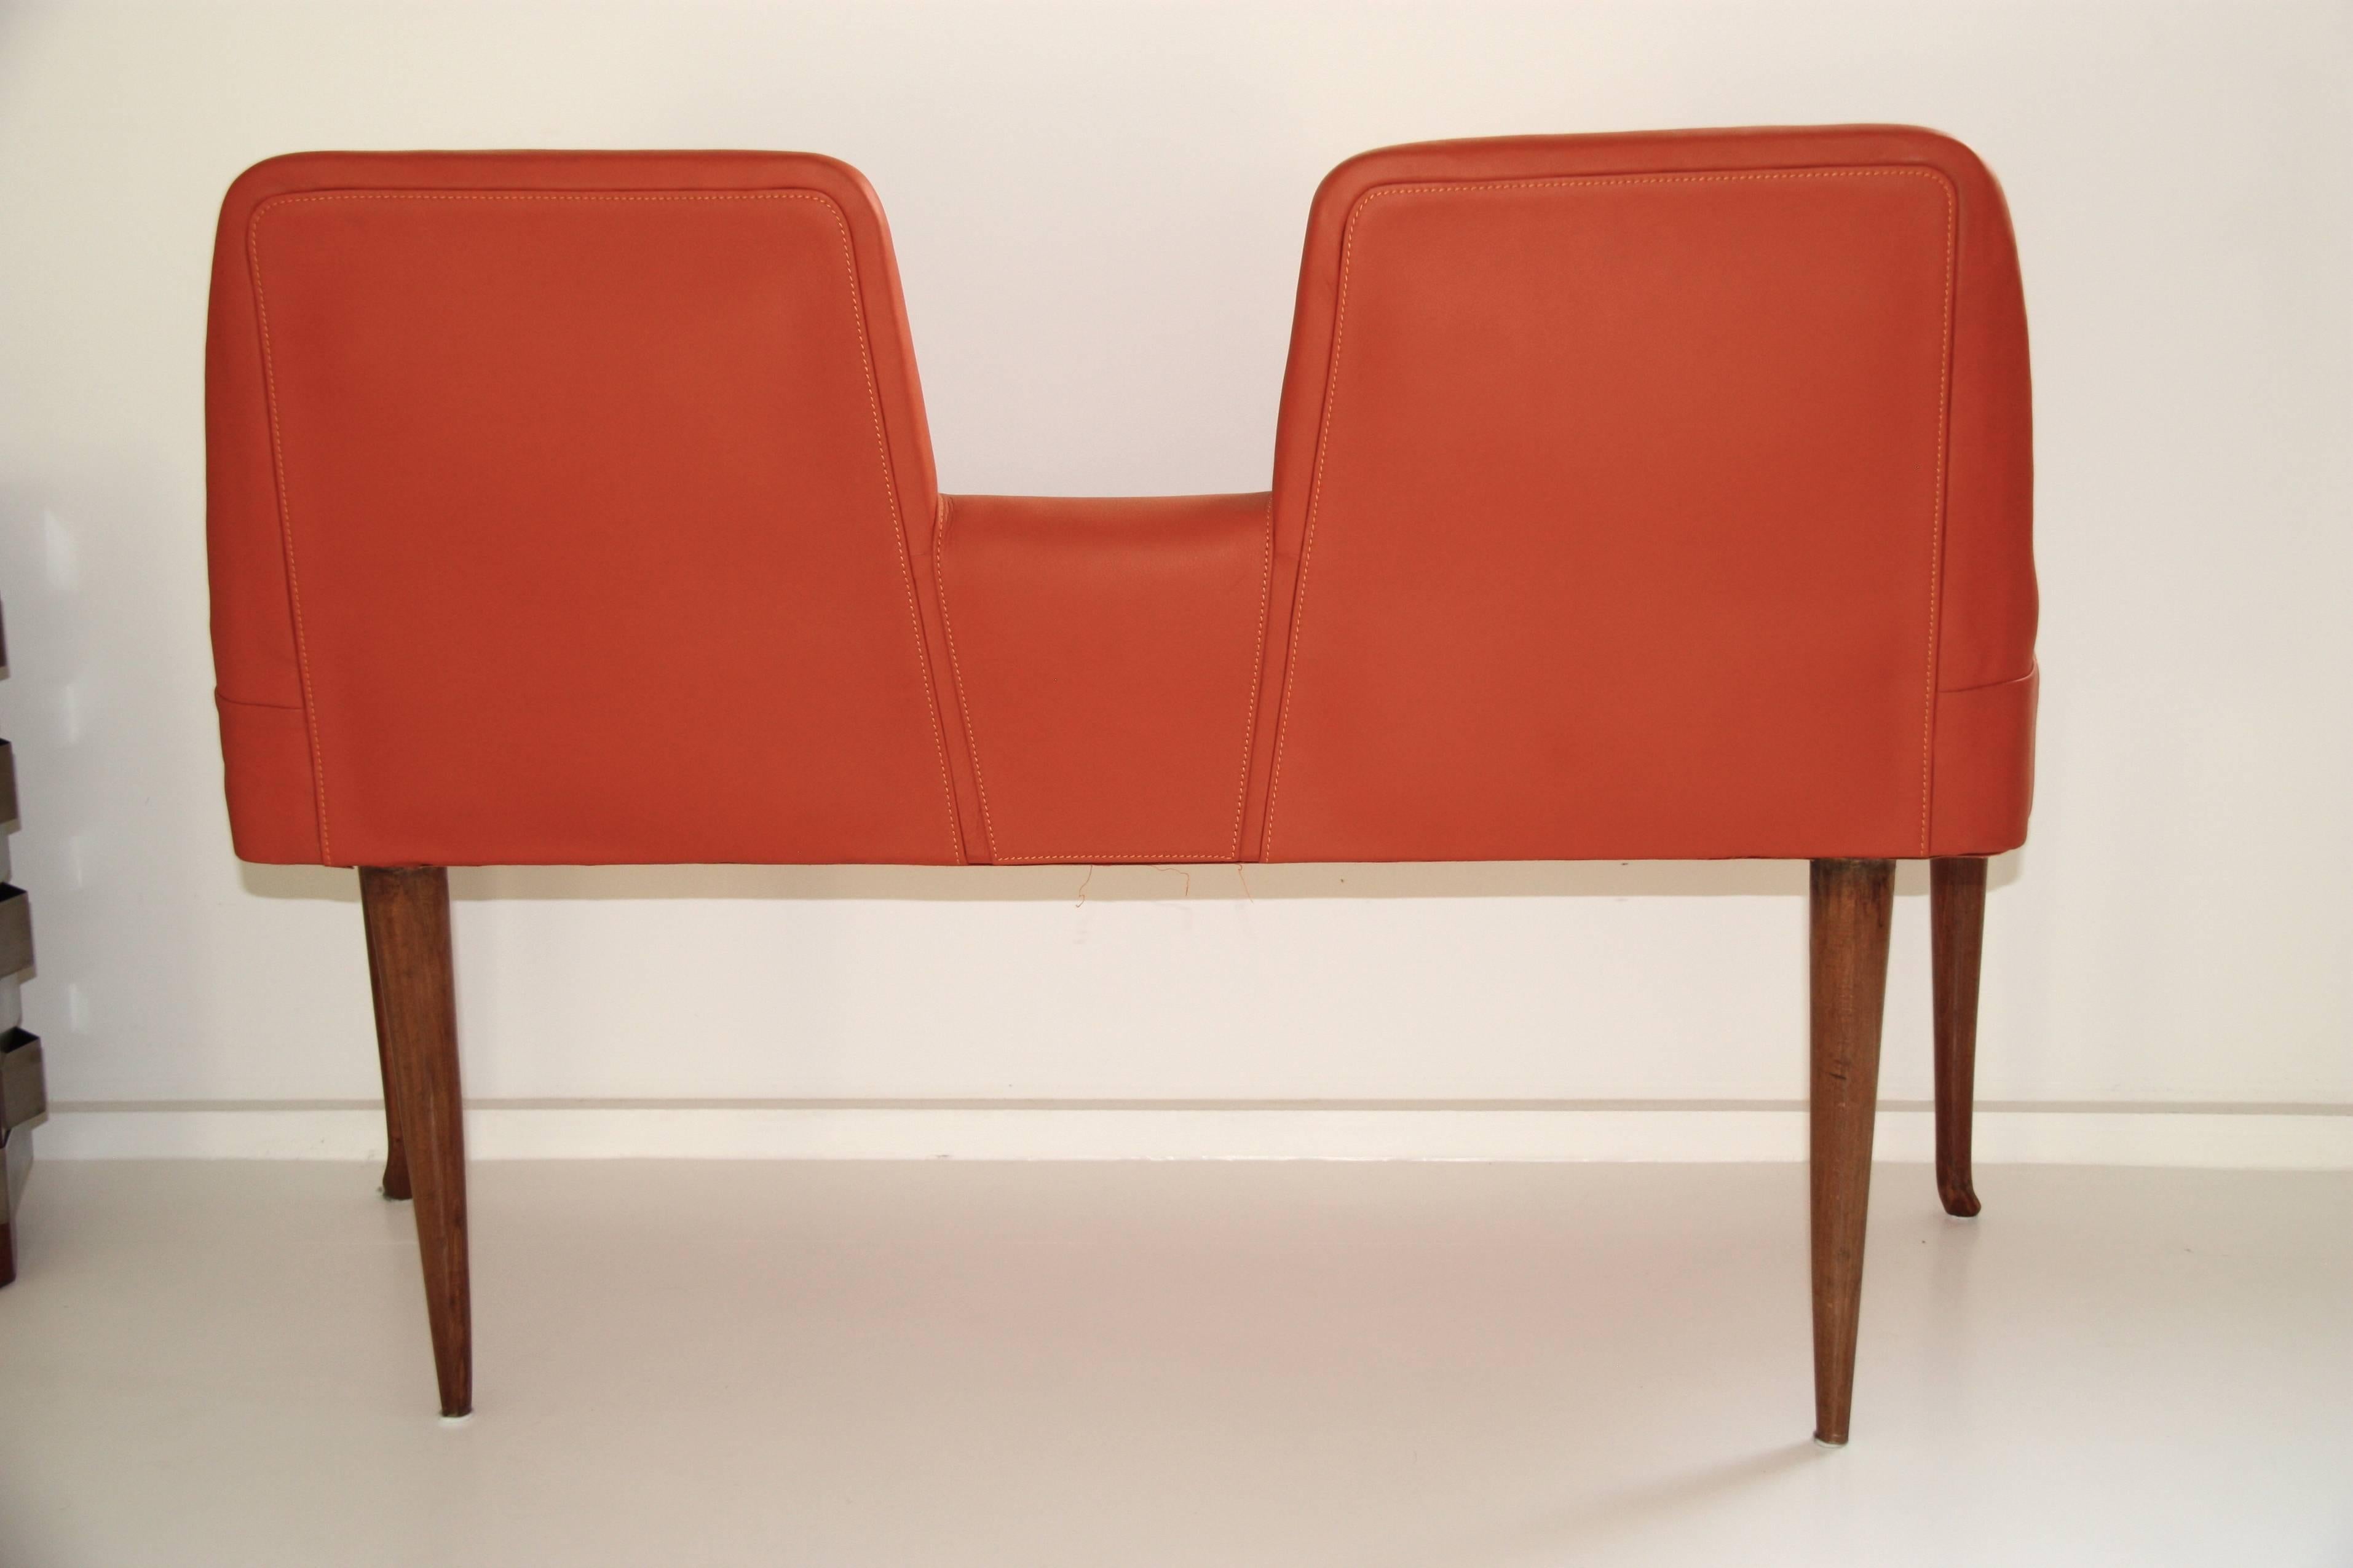 Vintage Italian Orange Leather Bench with Low Back, circa 1960 For Sale 2